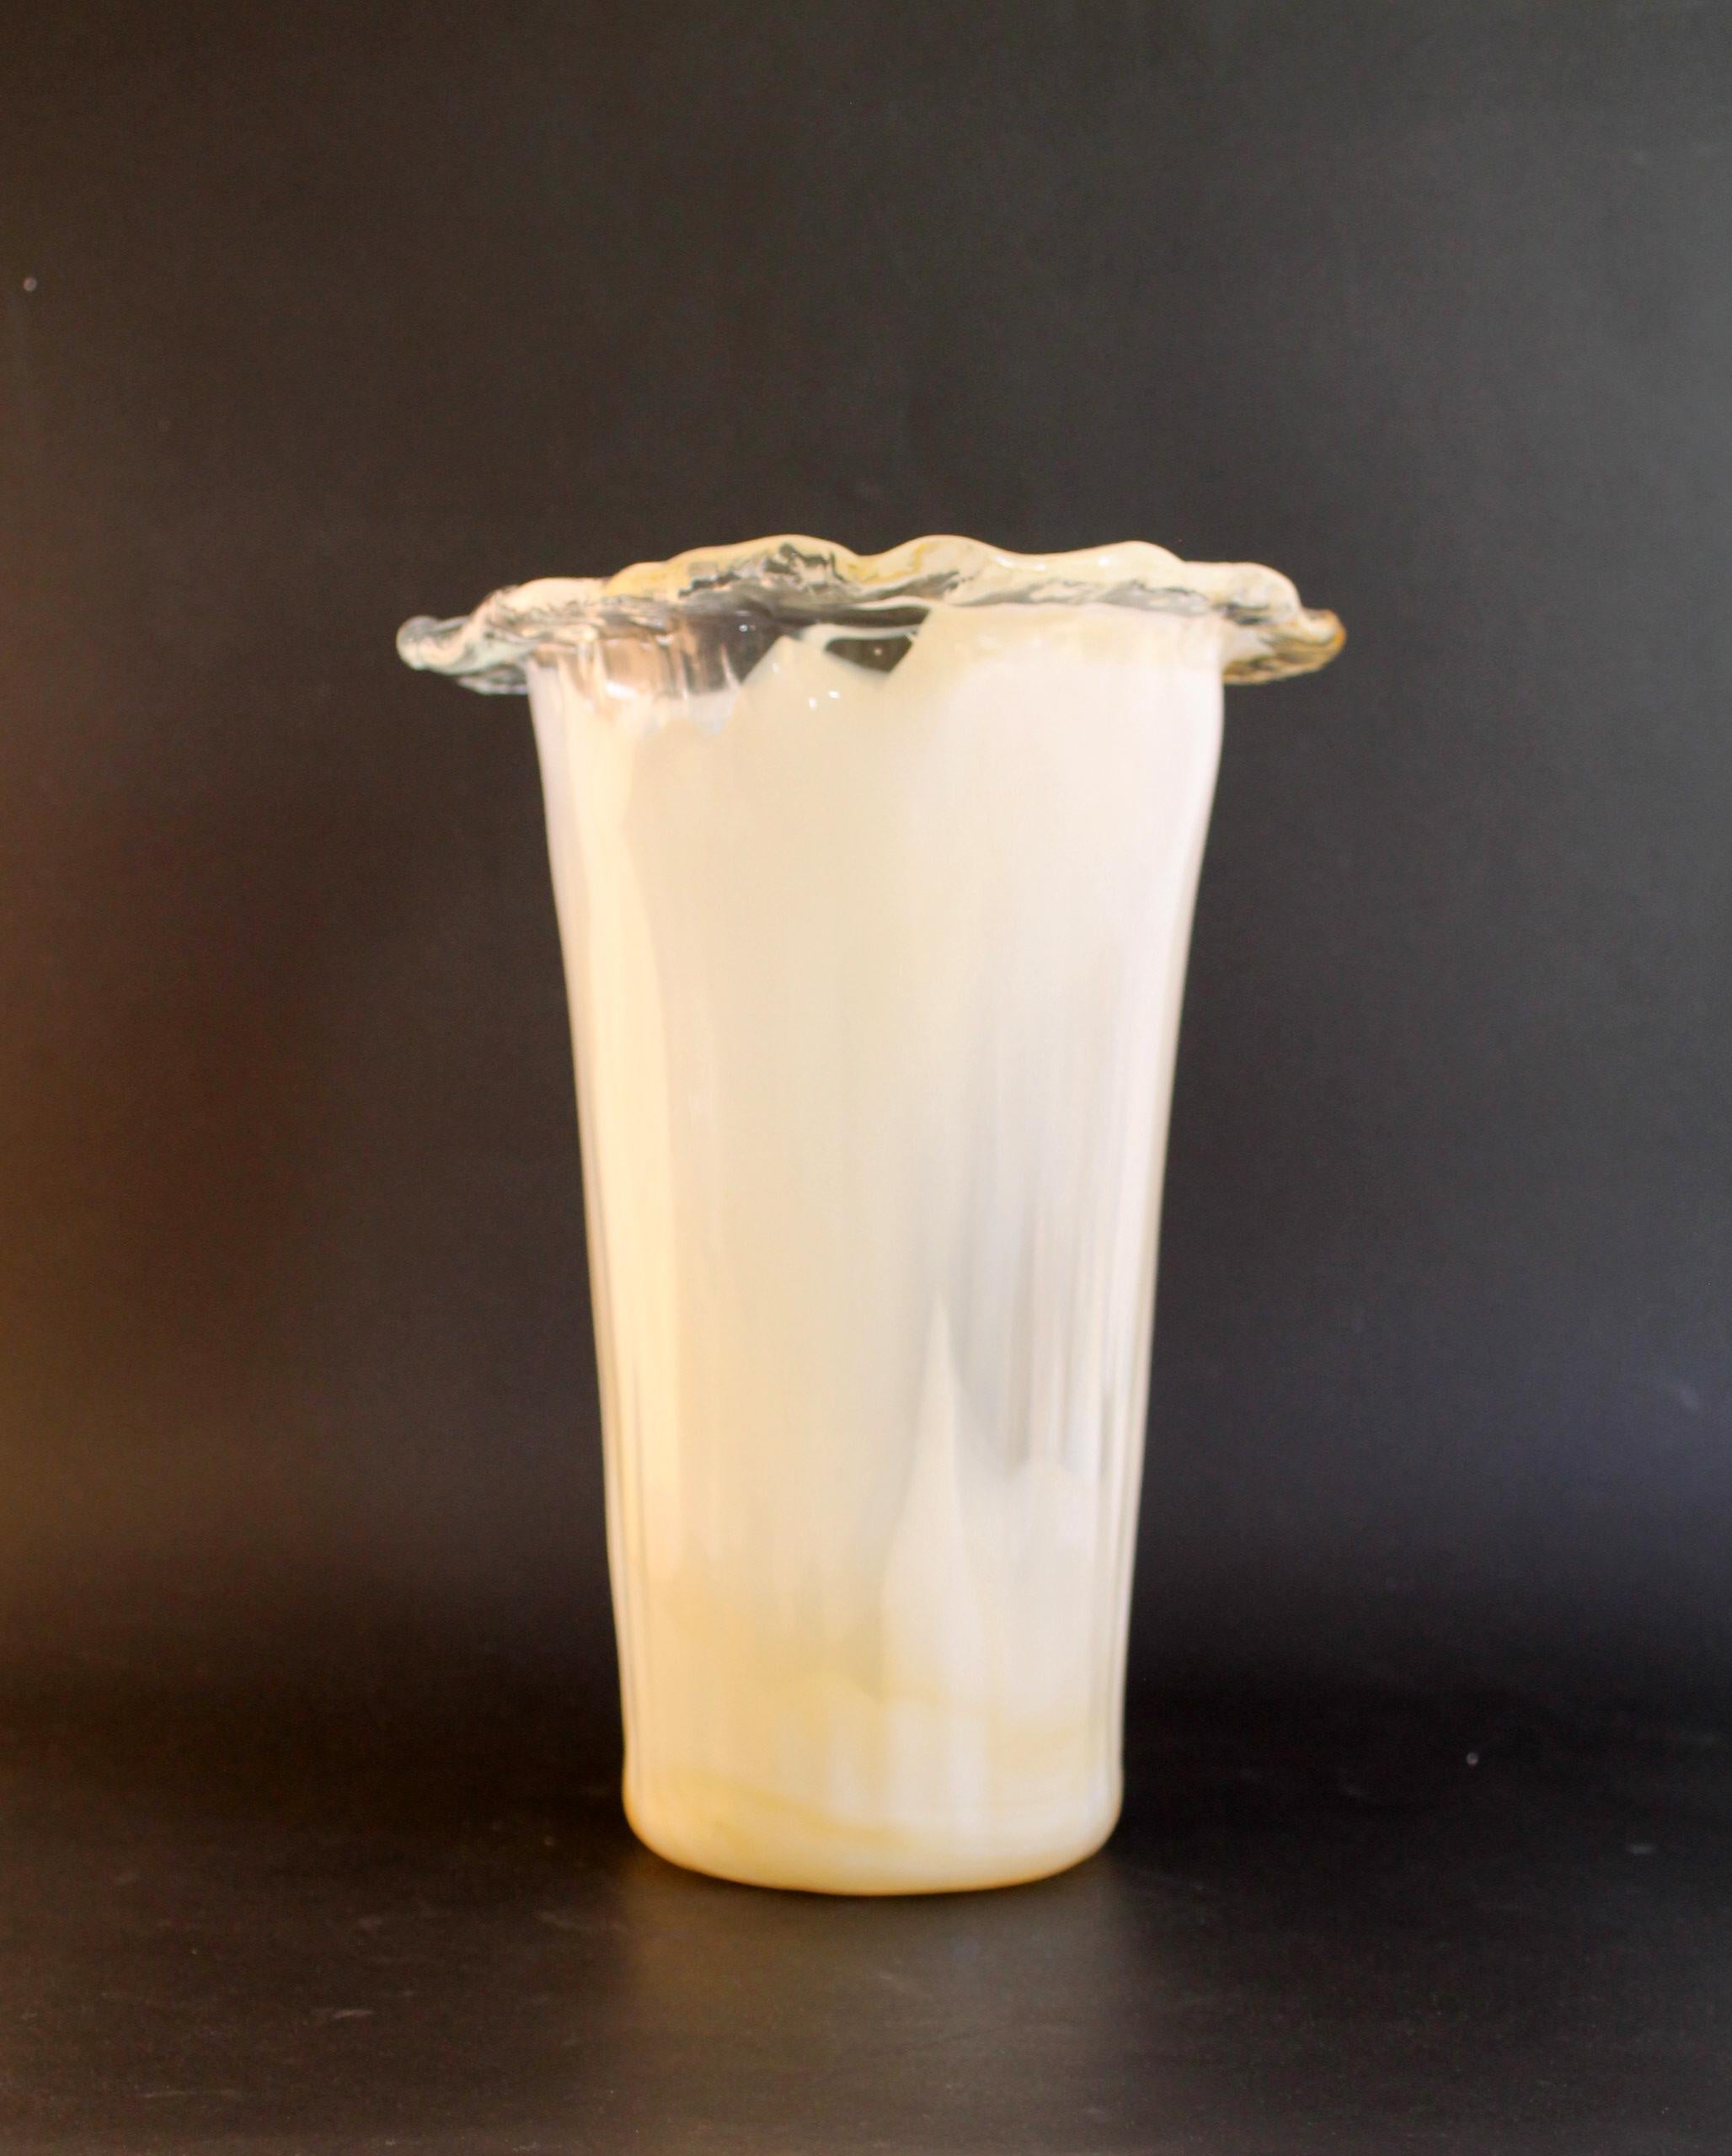 Original LA MURRINA vintage Murano glass vase with a great fused gold brown / white/translucent combination
1970s Murano glass vase in absolutely great shape. A real eye-catcher!!
Measurements: approx.. 32h x24 x 14cm 
Etched signature + labeled